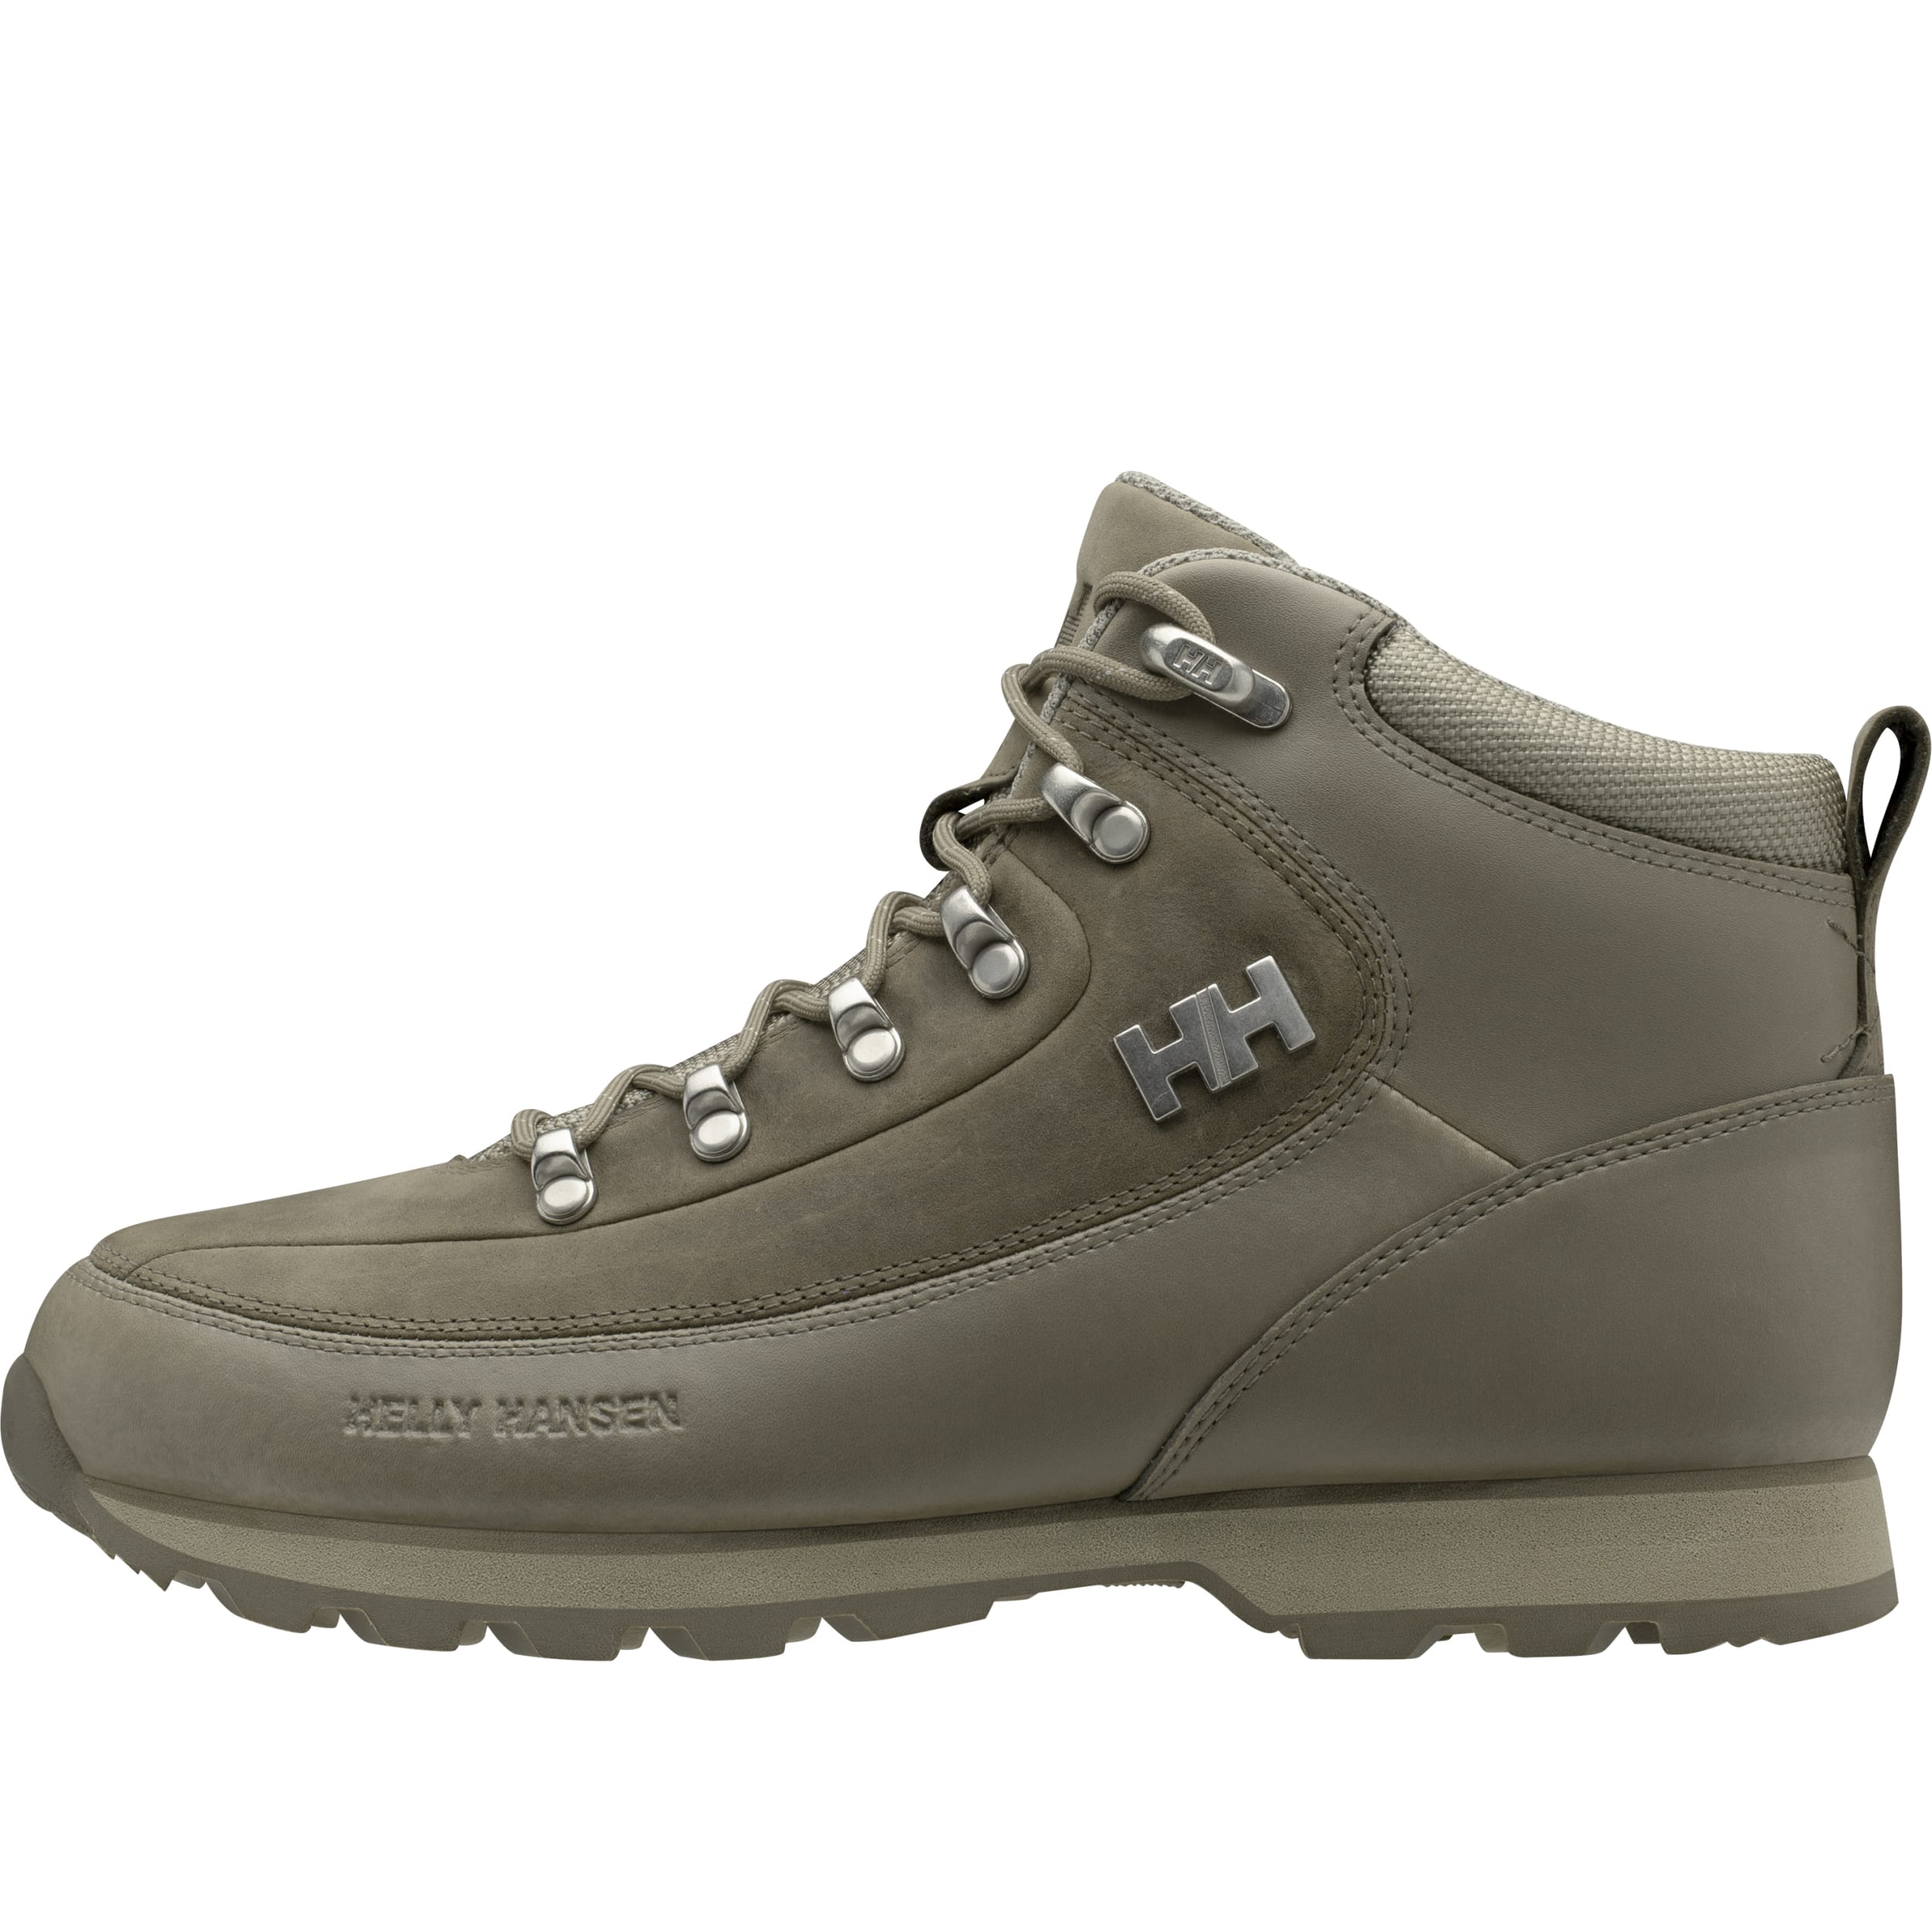 Helly Hansen Women's The Forester Winter Boot in Fallen Rock-Aluminum from the side